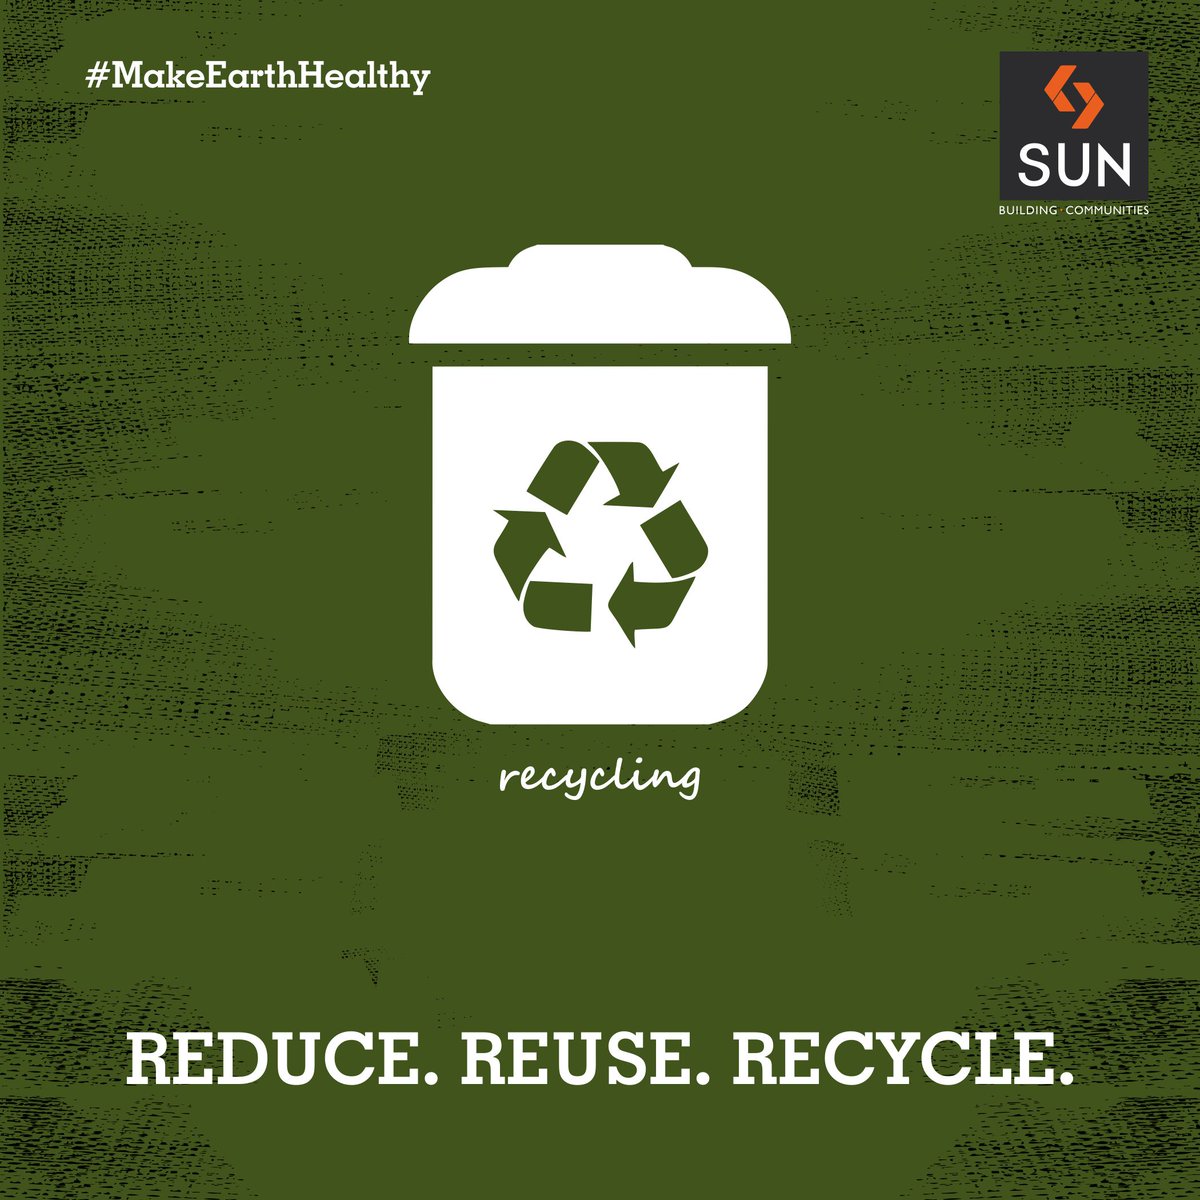 #MakeEarthHealthy
Use resources optimally. Reduce wastage, encourage reuse and recycle whenever possible. https://t.co/Wu5nGhQ5Uj